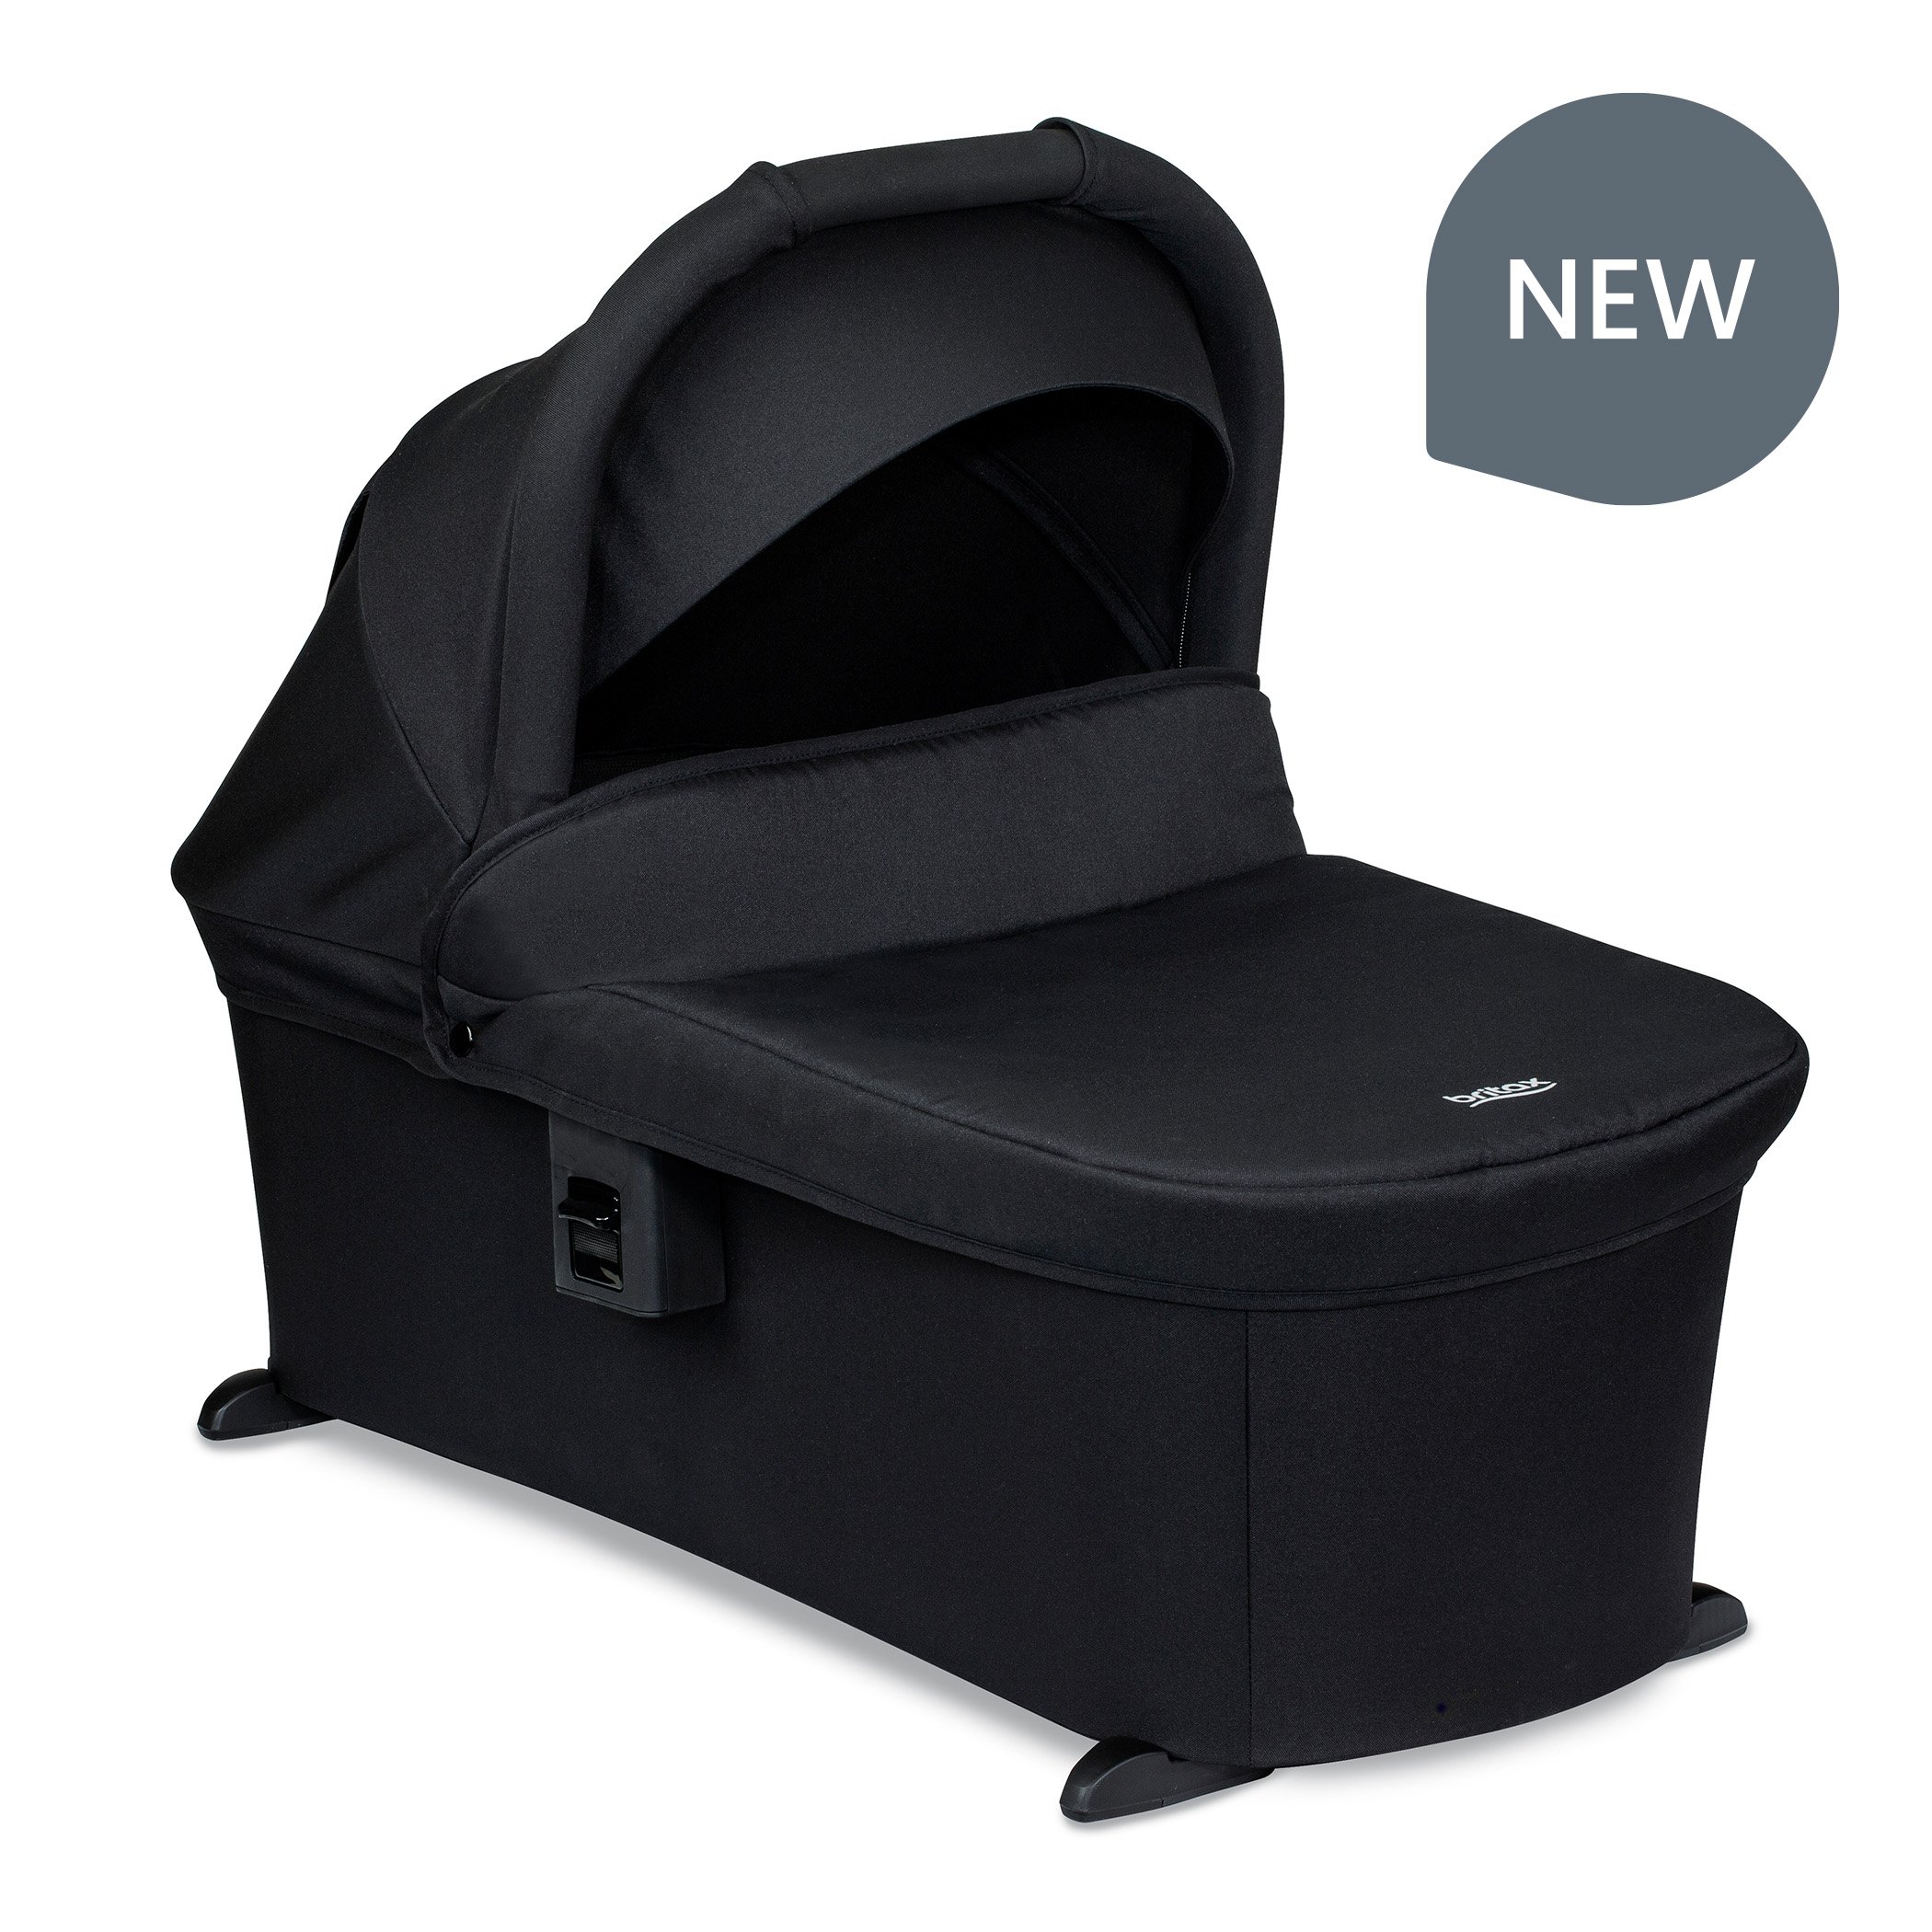 Zinnia Bassinet with NEW callout